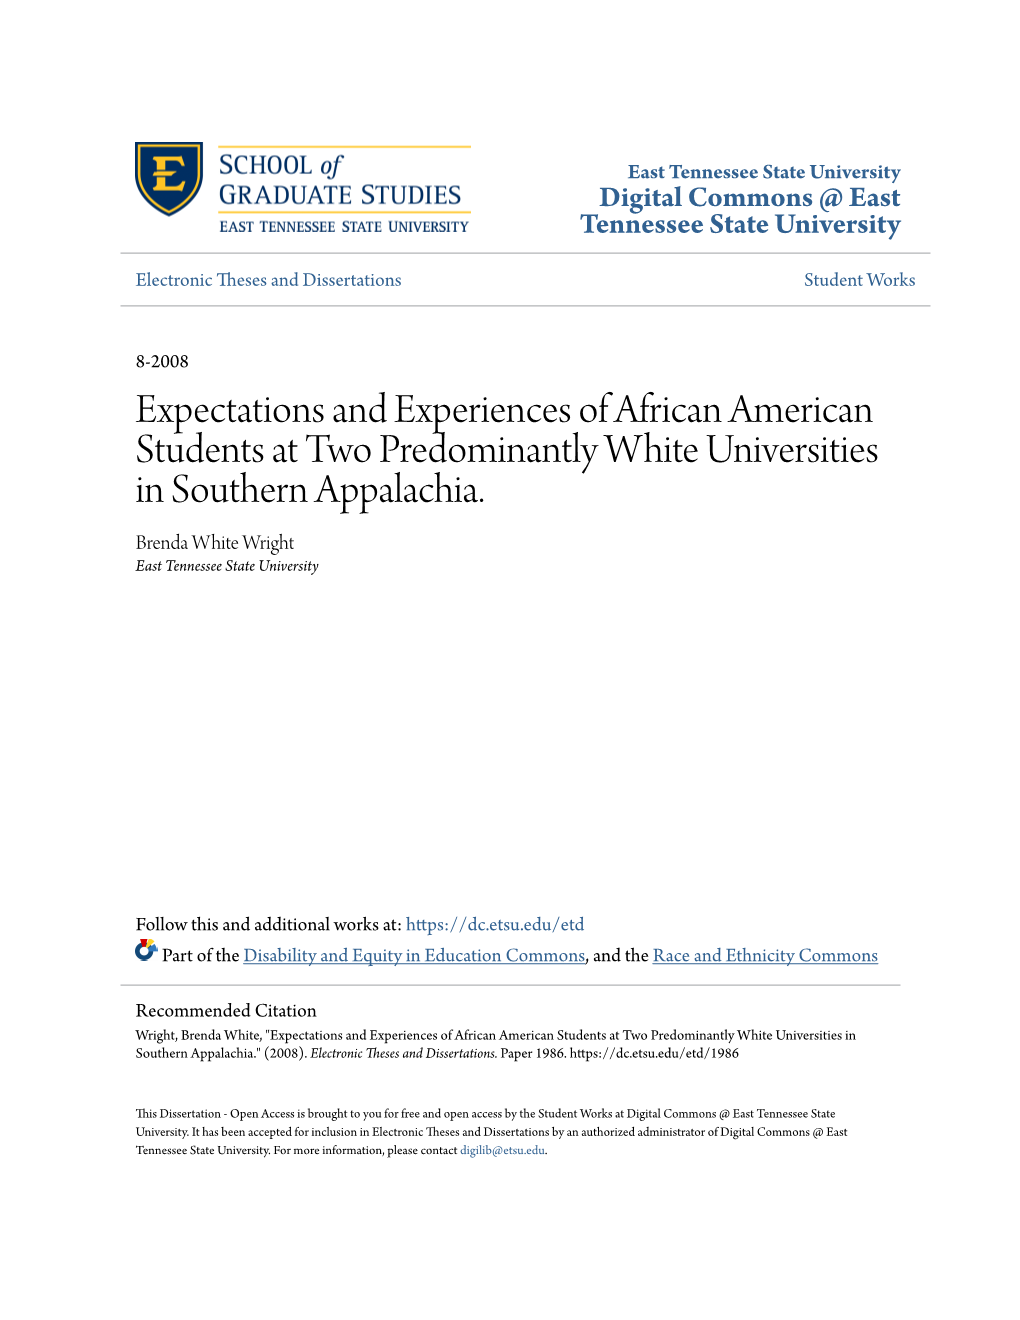 Expectations and Experiences of African American Students at Two Predominantly White Universities in Southern Appalachia